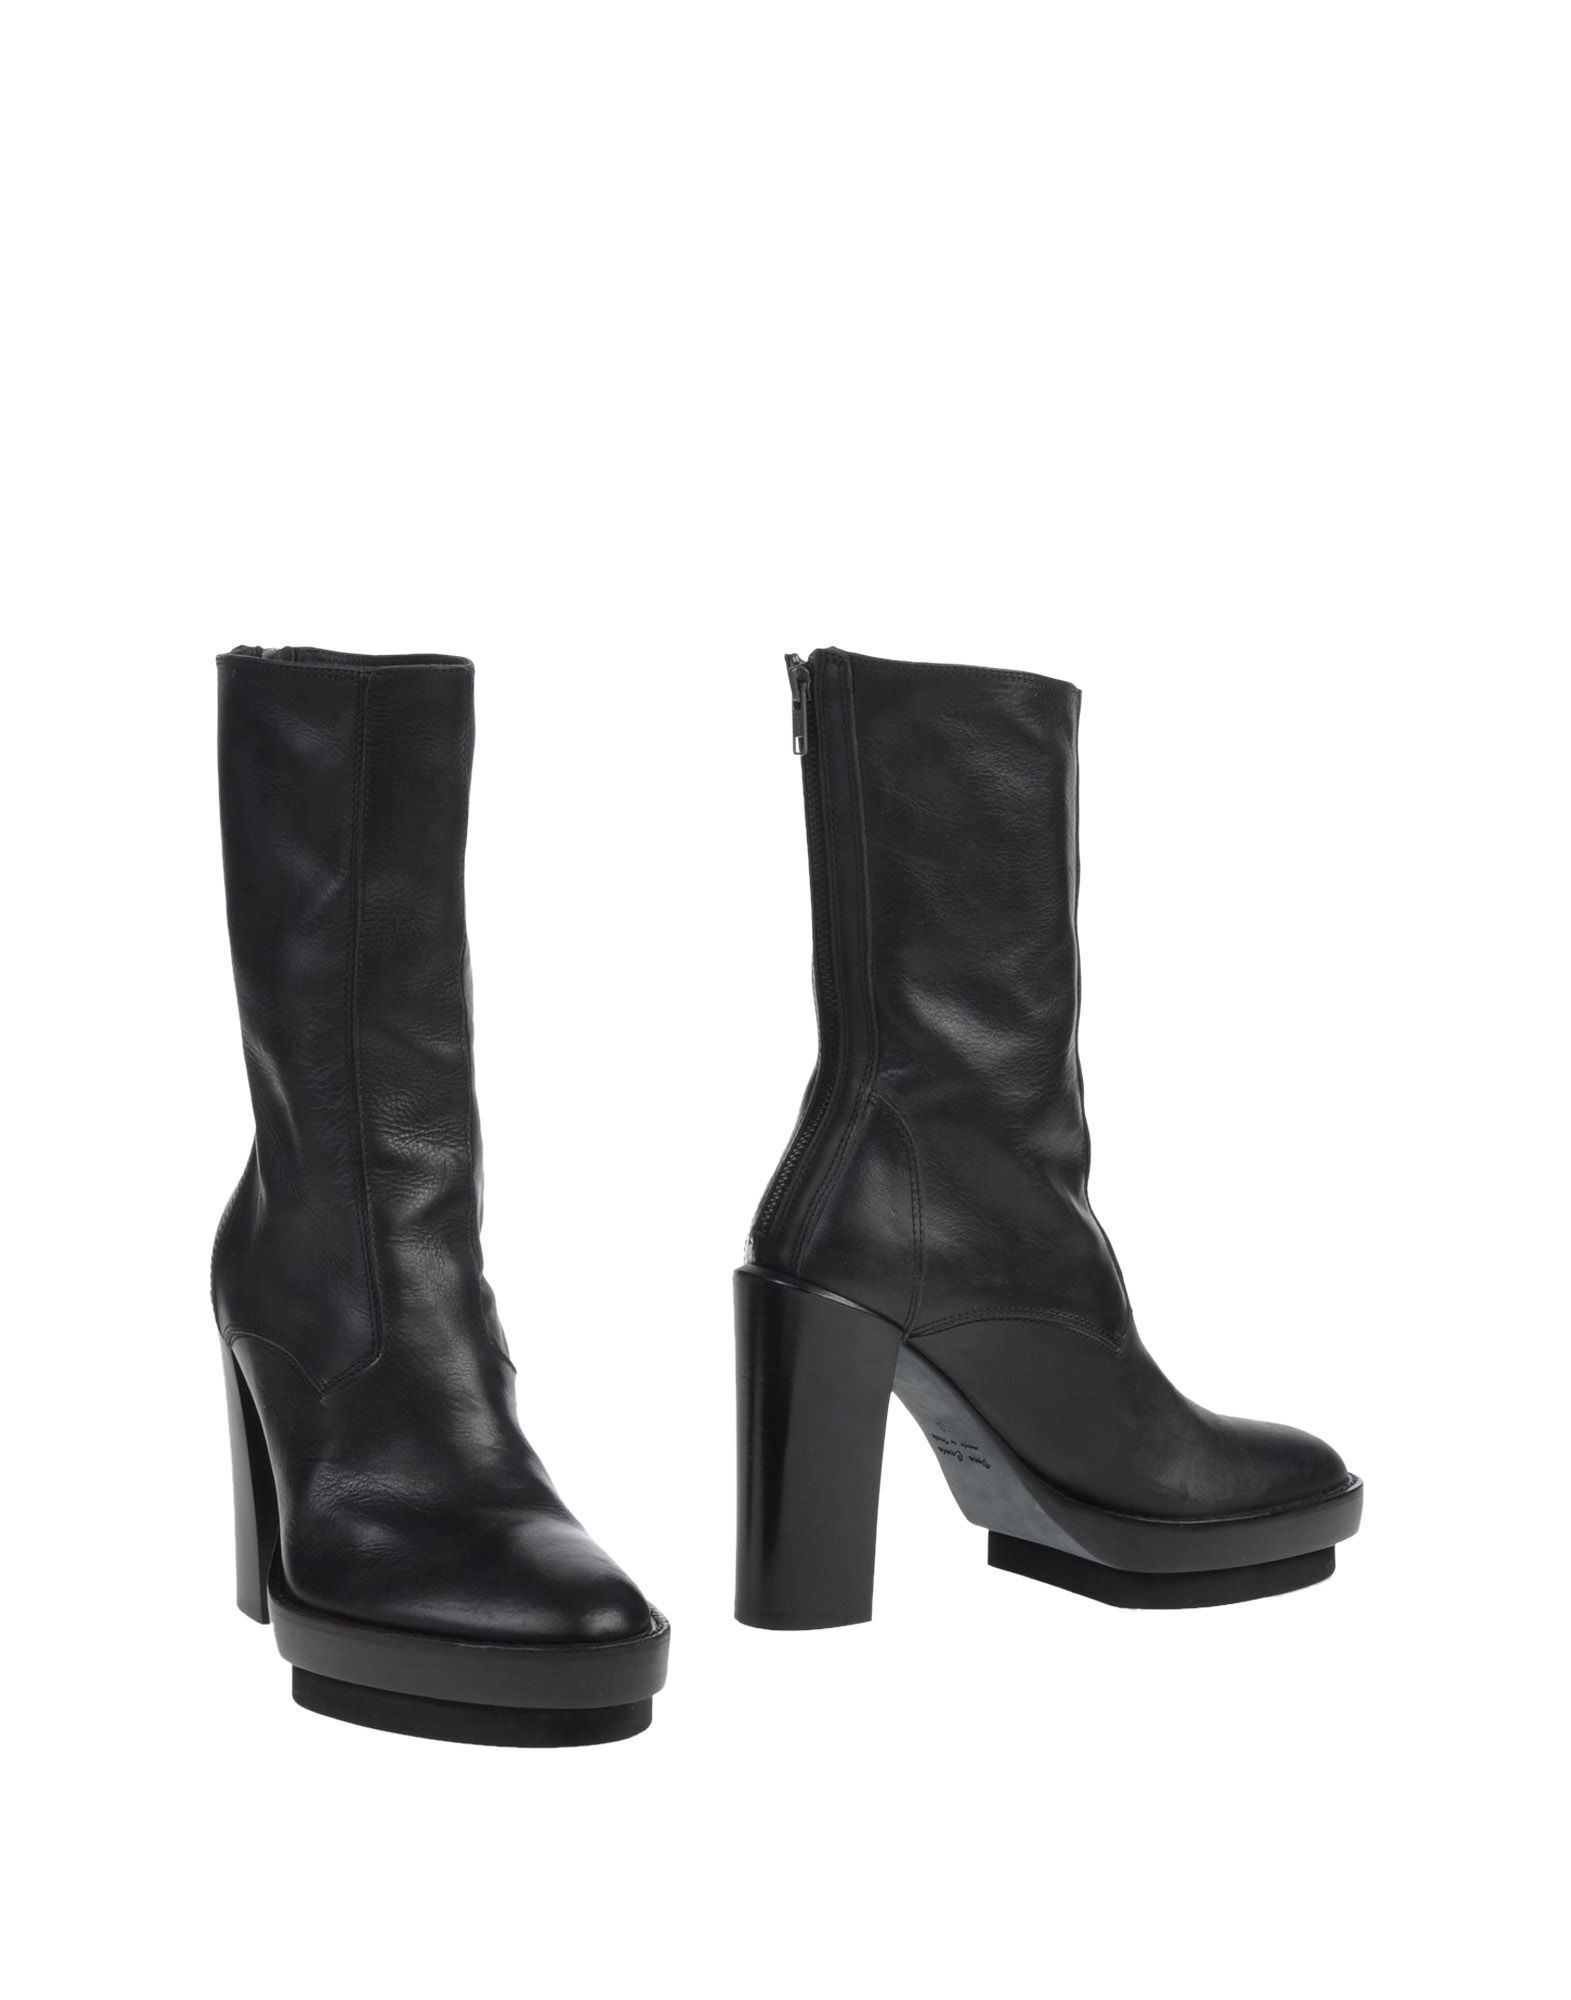 Lyst - Ann demeulemeester Ankle Boots in Black